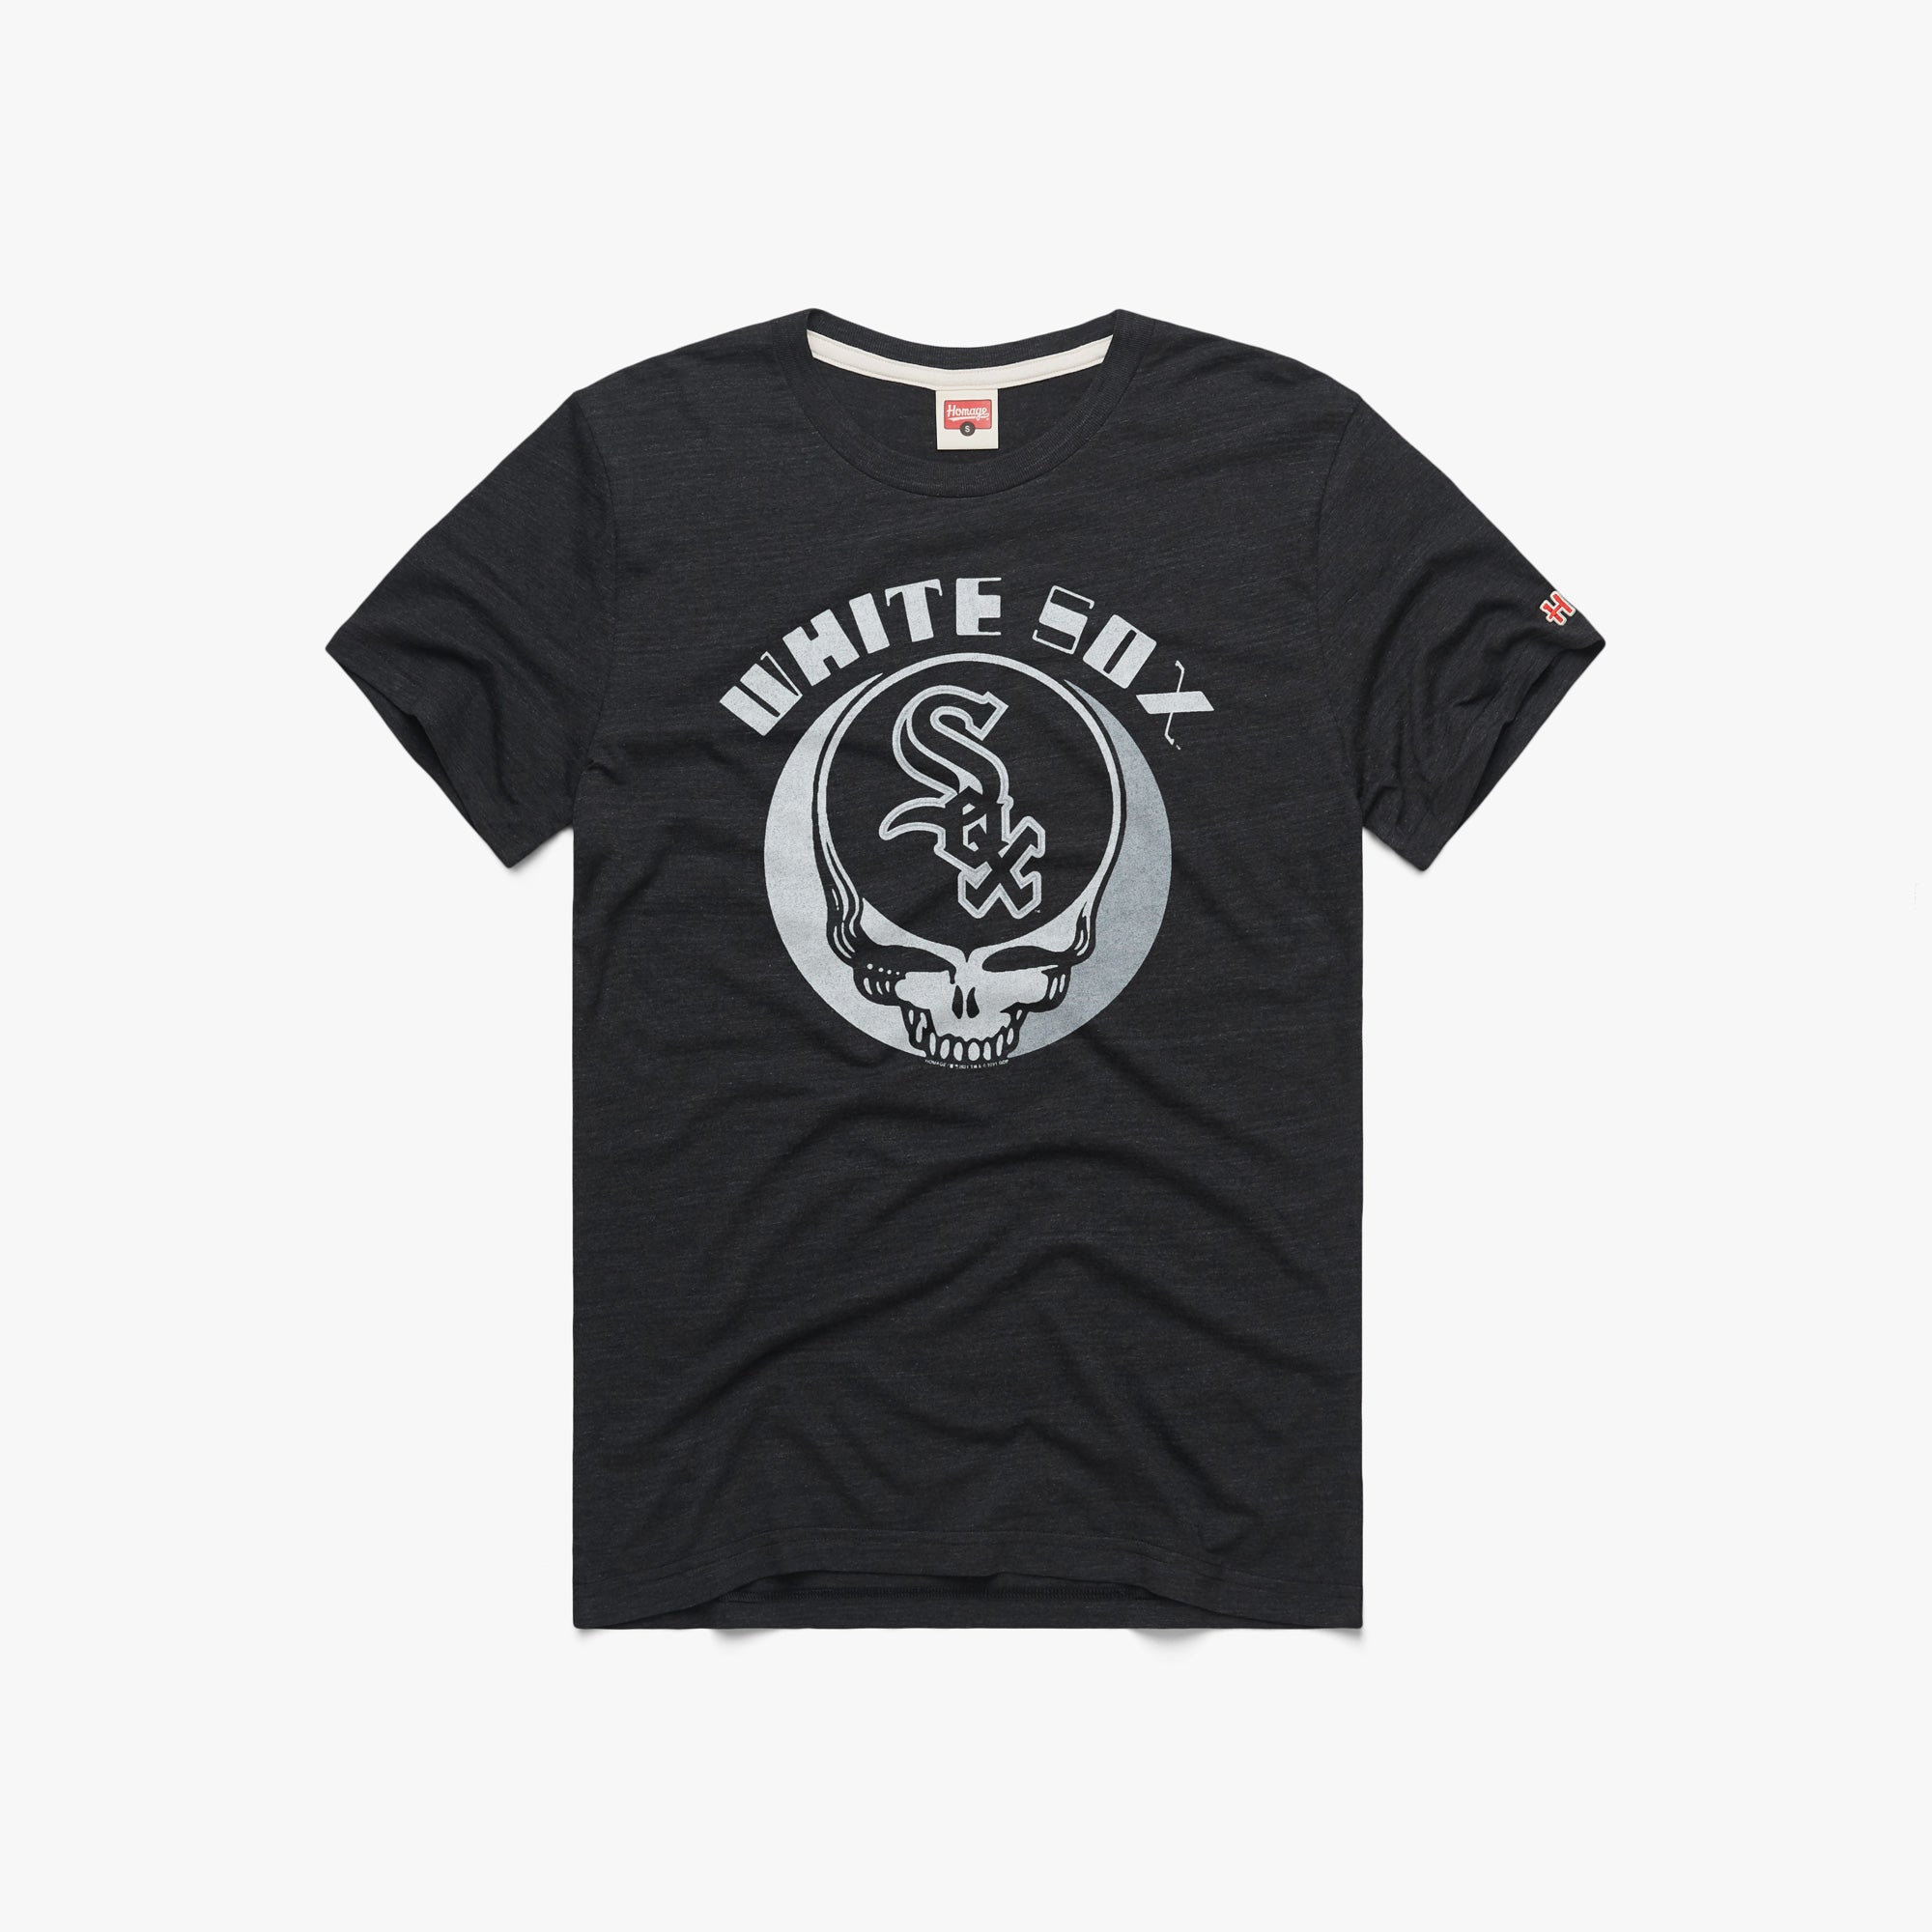 MLB x Grateful Dead x White Sox T-Shirt from Homage. | Charcoal | Vintage Apparel from Homage.